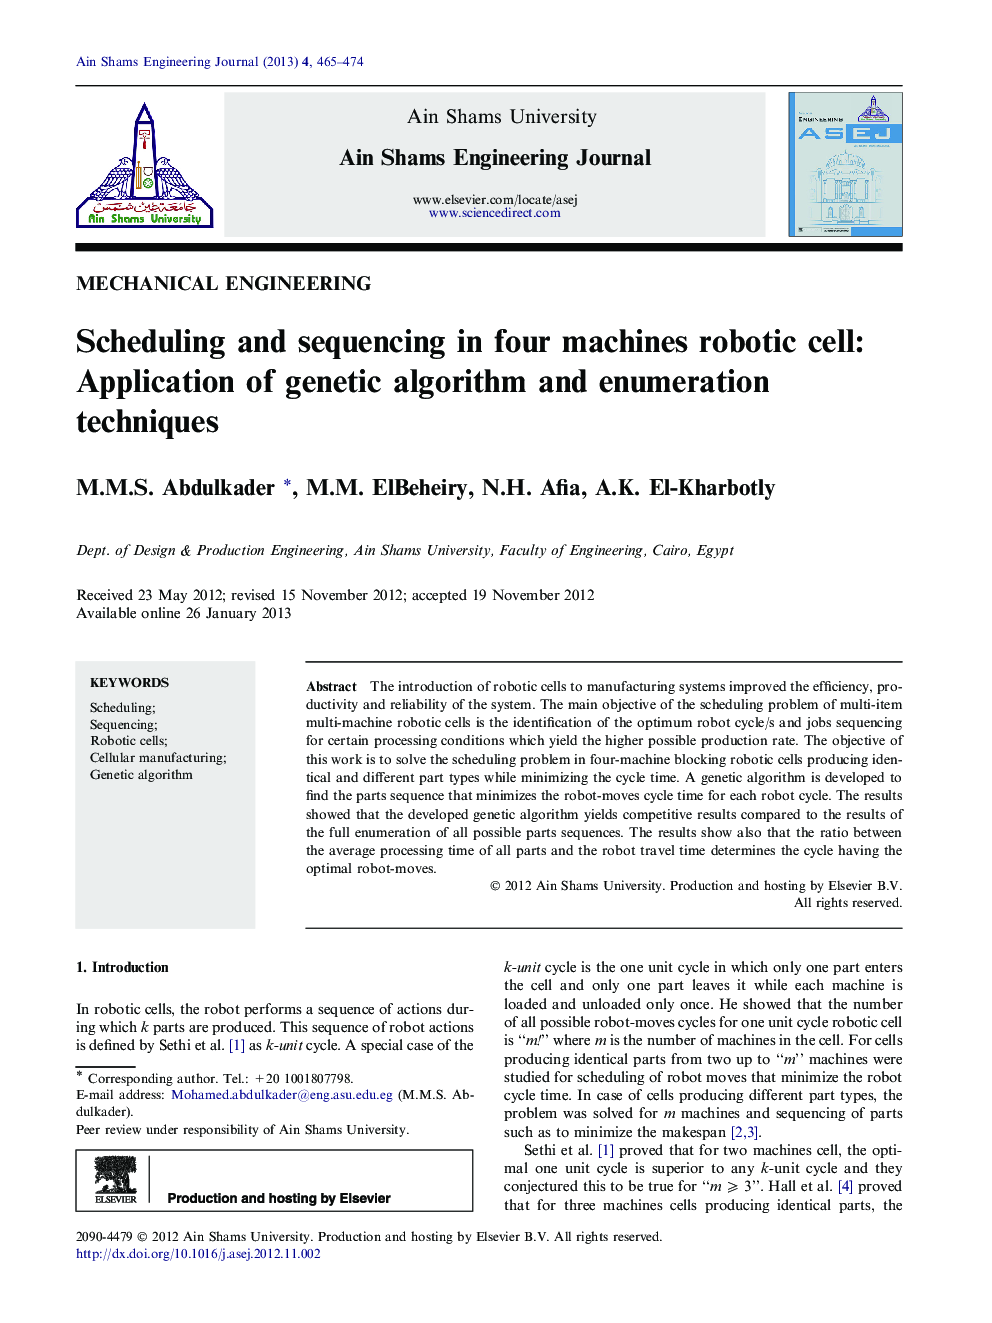 Scheduling and sequencing in four machines robotic cell: Application of genetic algorithm and enumeration techniques 